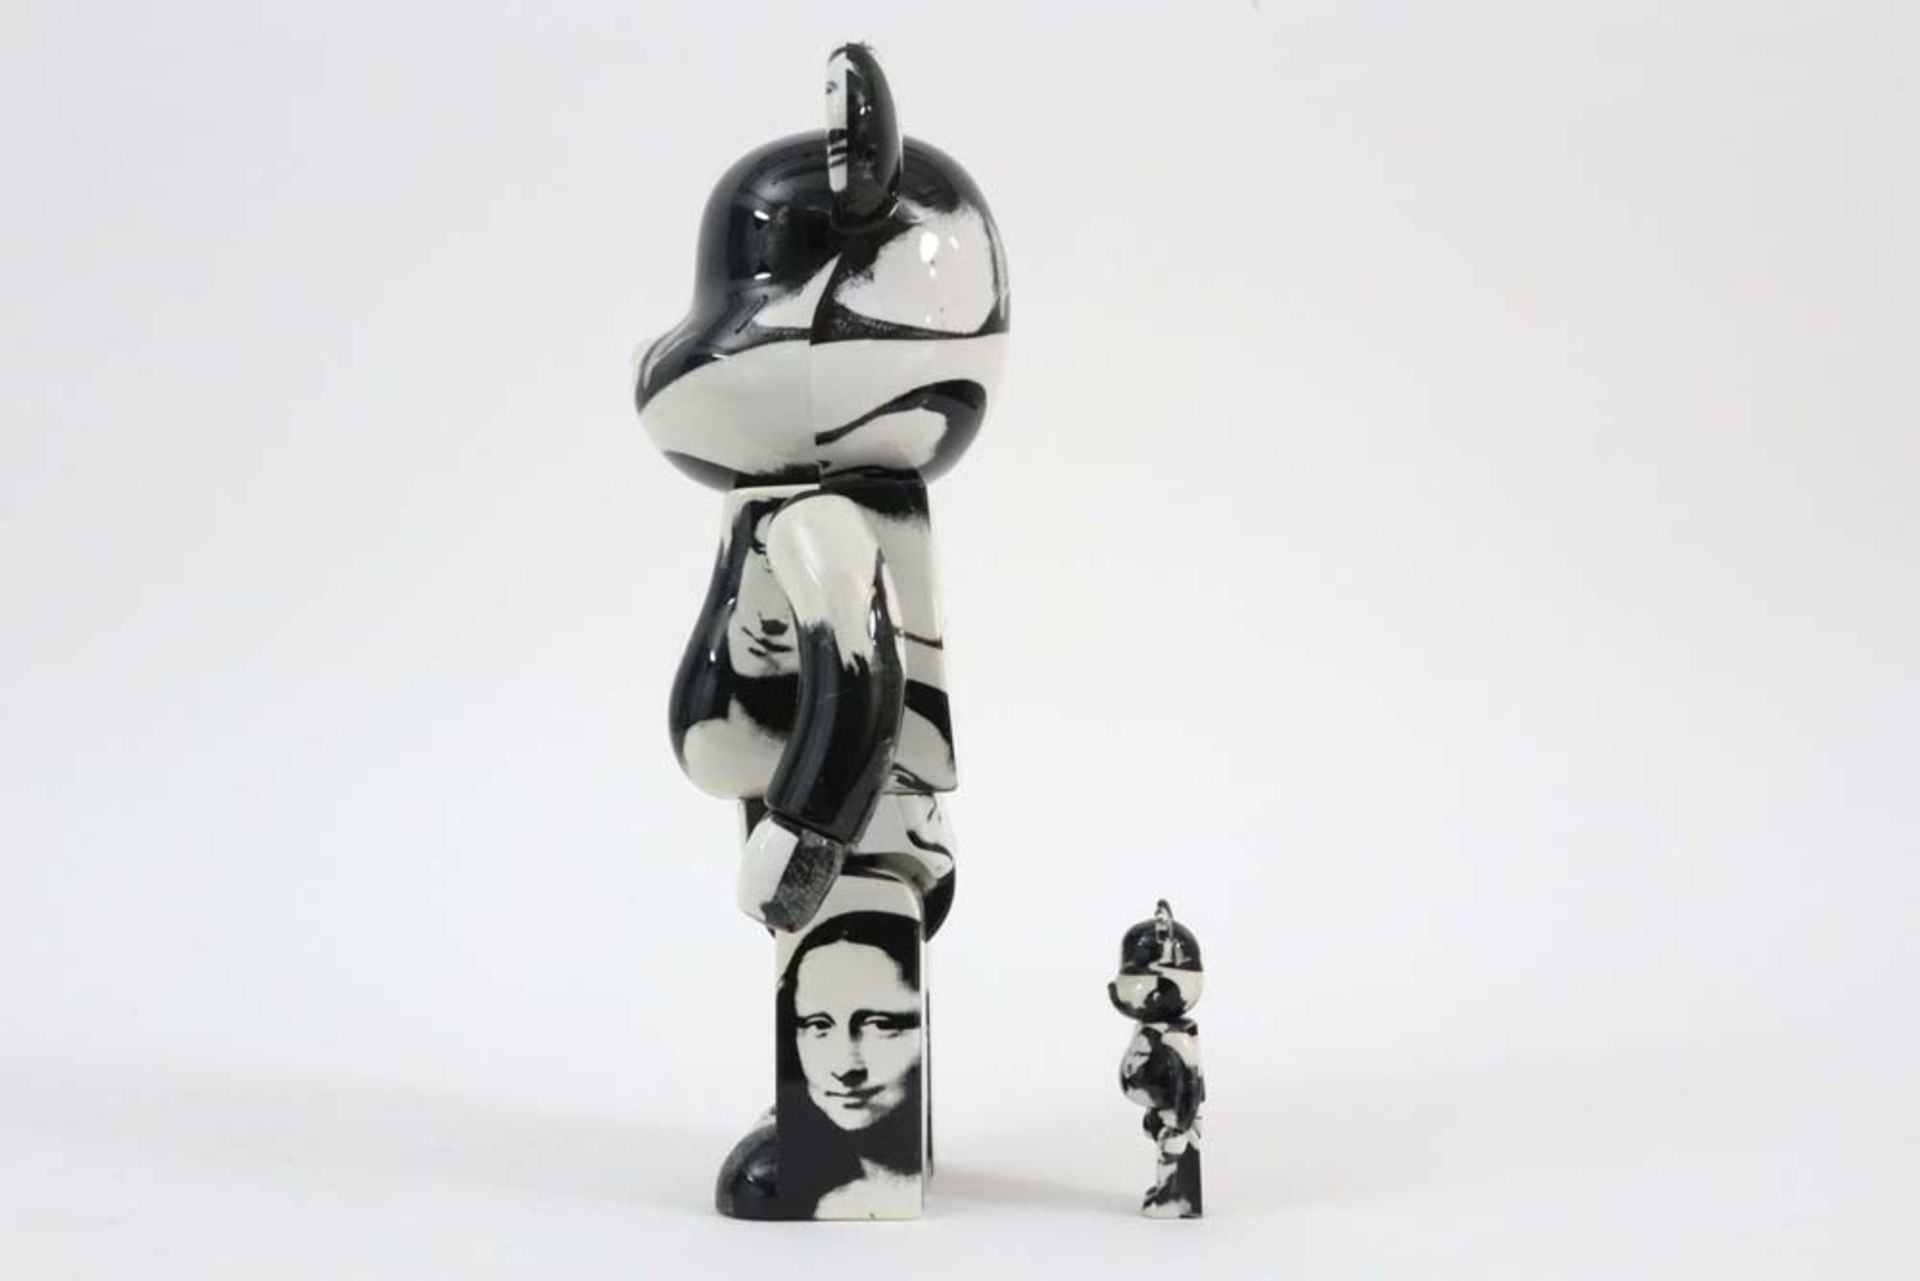 Bearbrick set of small and bigger sculpture after the double Mona Lisa" print by Andy Warhol - - Bild 3 aus 6